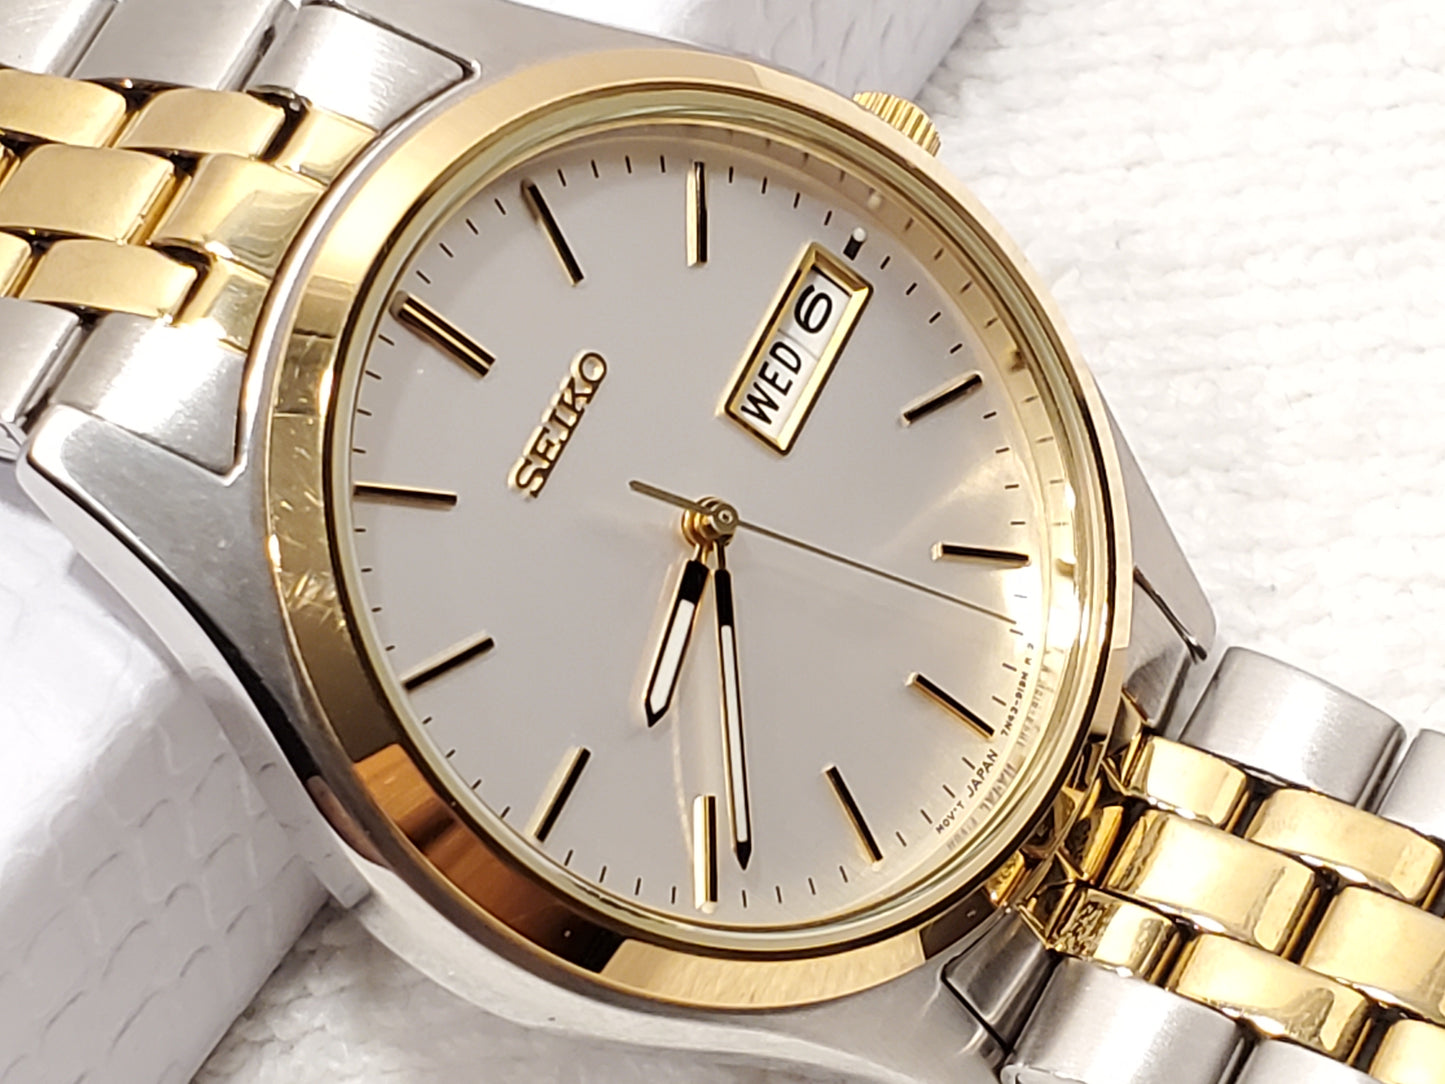 Vintage Seiko Men's Day Date Watch Stainless Steel Gold Tone Silver Dial